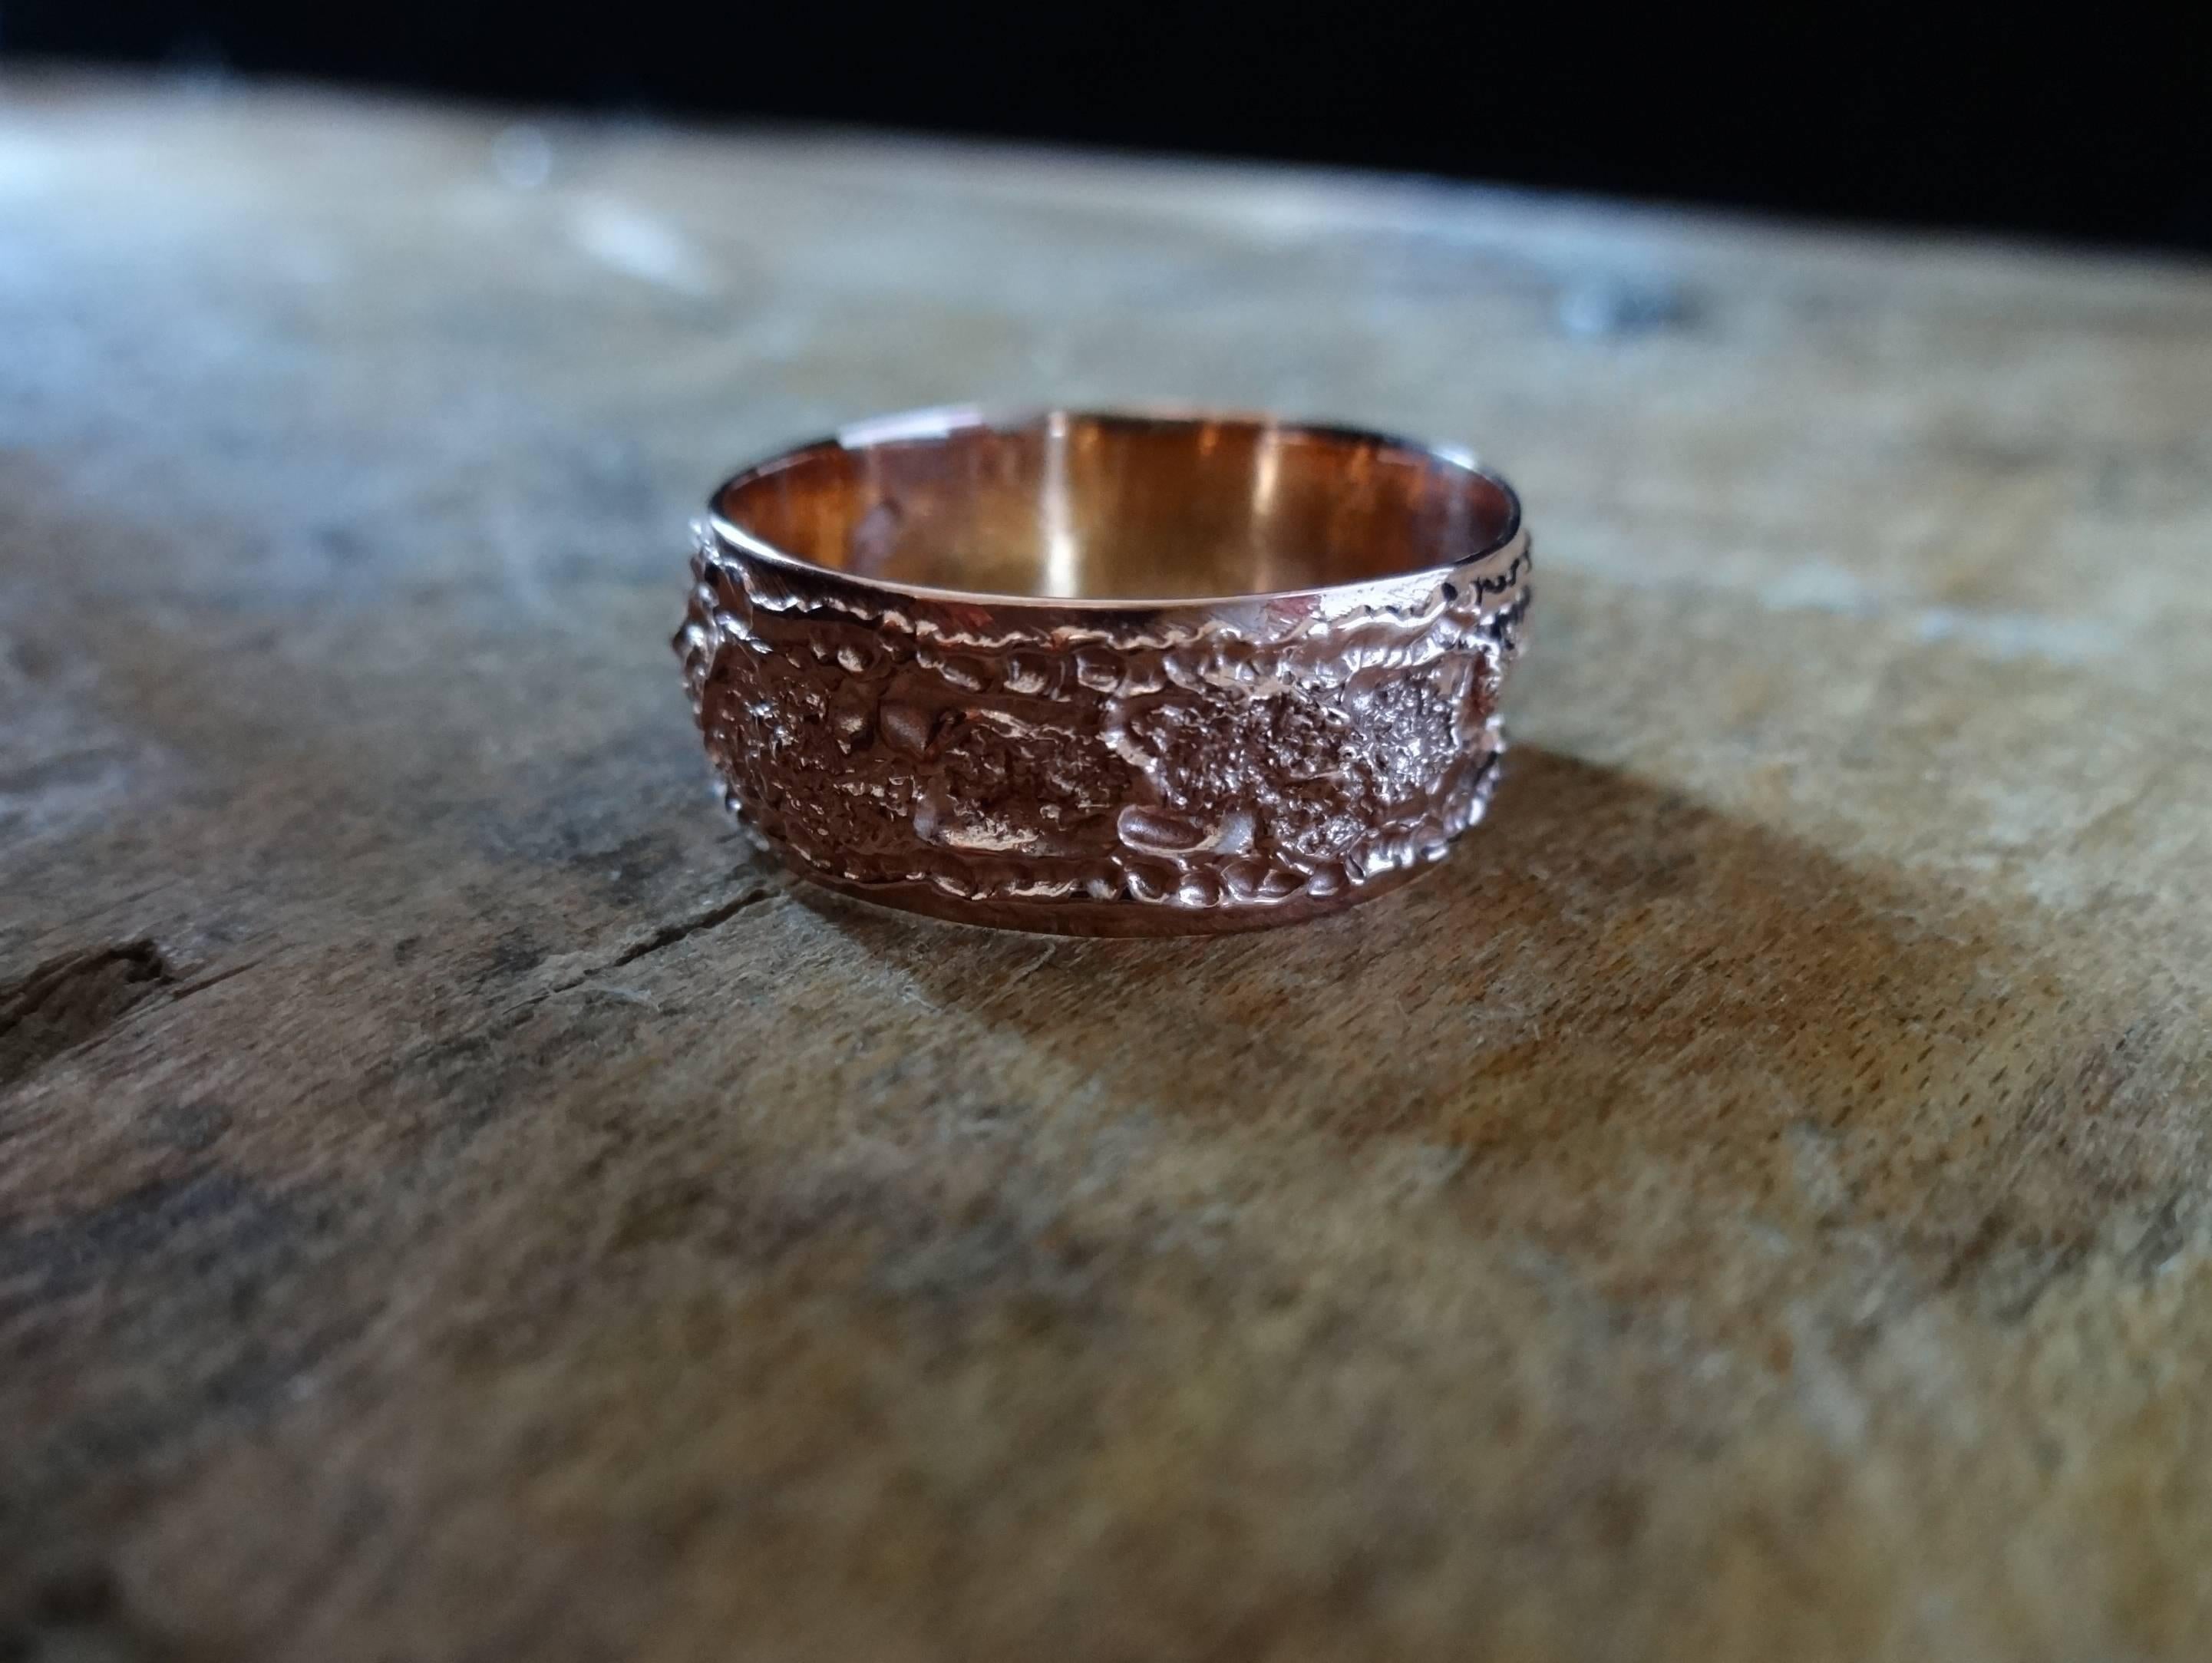 
Edgy band ring with an organic edge. An exploration of texture and surface dynamics, this ring was created using manipulation techniques to create uneven dimensions and areas of different granualization and light refraction, all bordered by a fine,